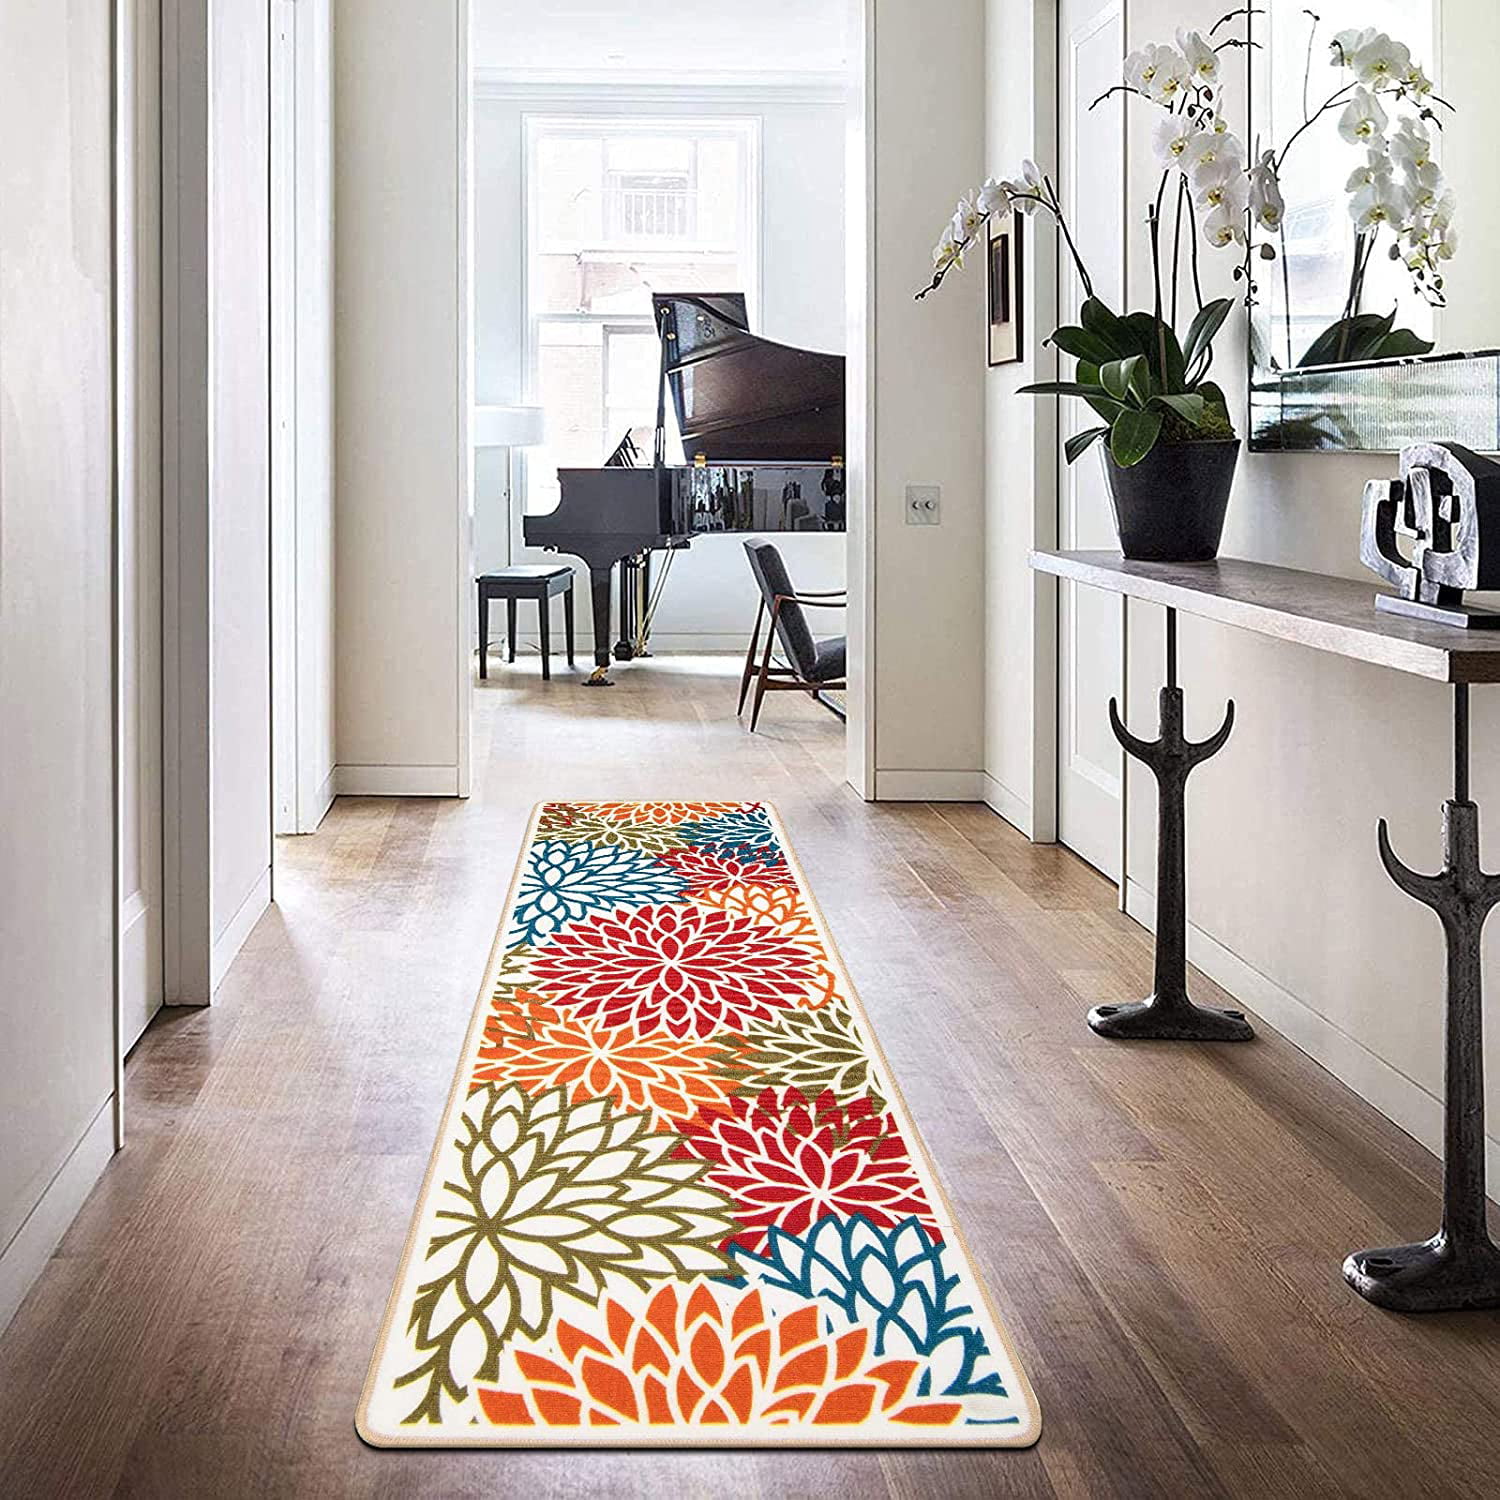 Medallion Floral Area Runner Rug 2'x6'Non Skid Washable Rug 2'x6' Ft Colorful 